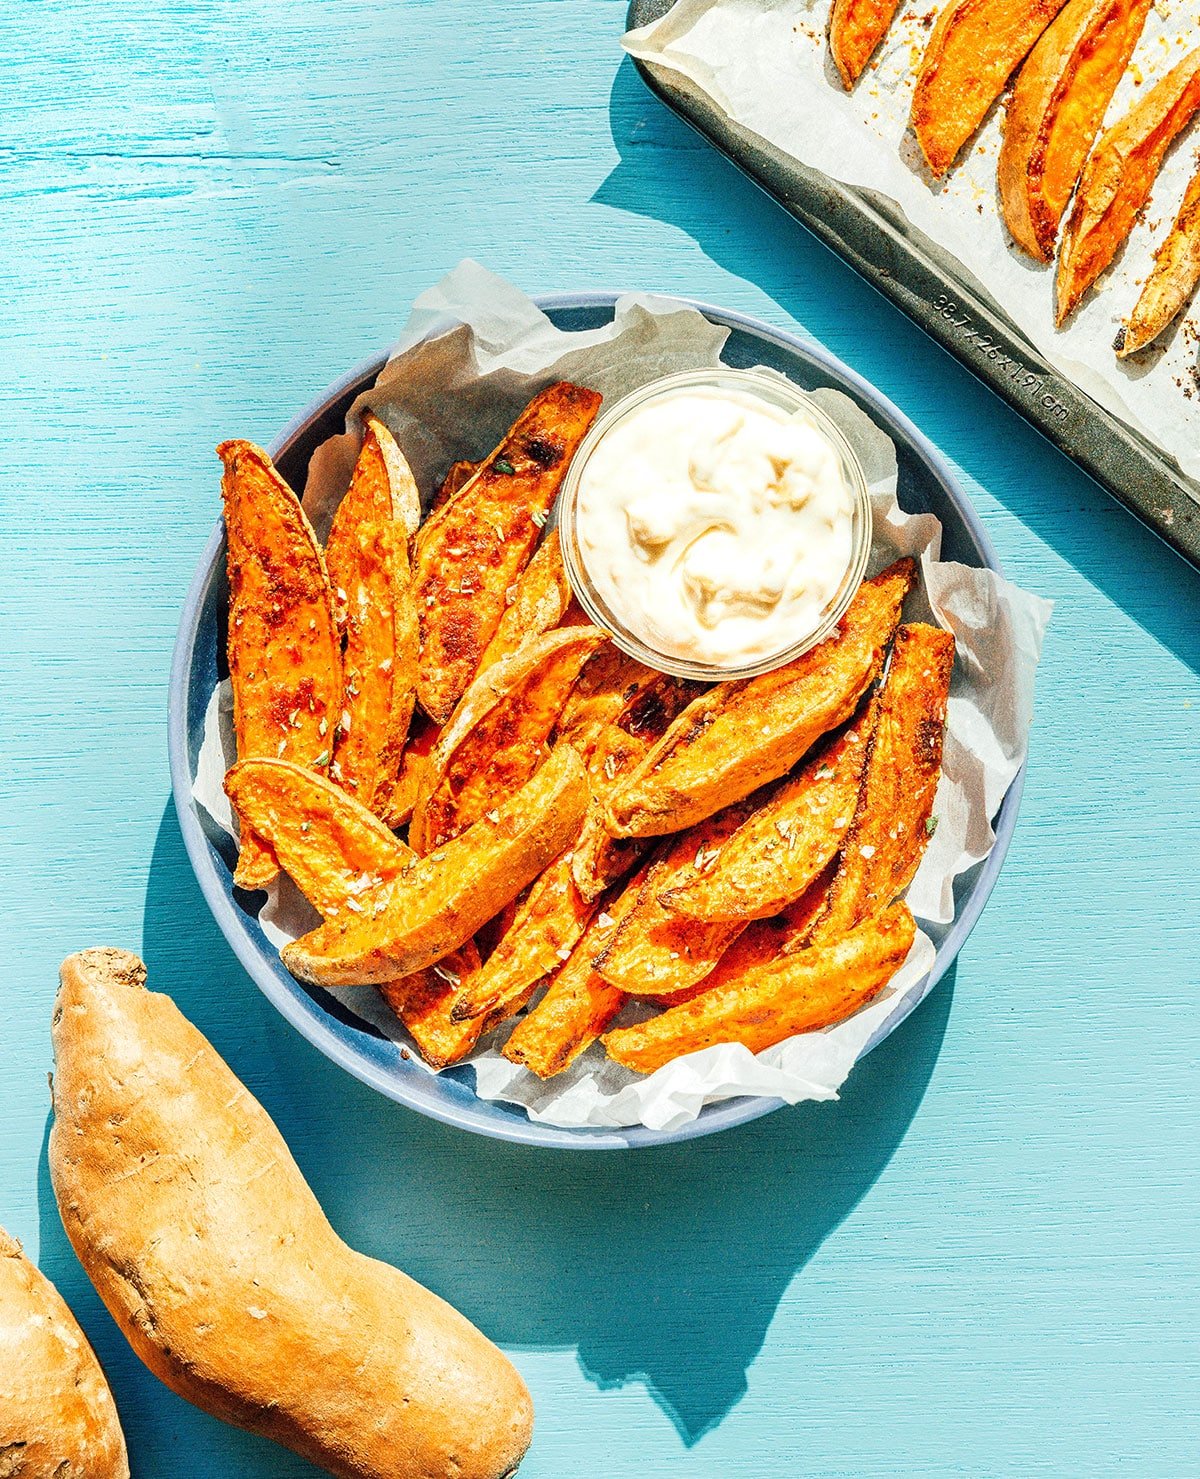 A blue bowl filled with oven-baked sweet potato wedges and a small bowl of garlic mayo sauce